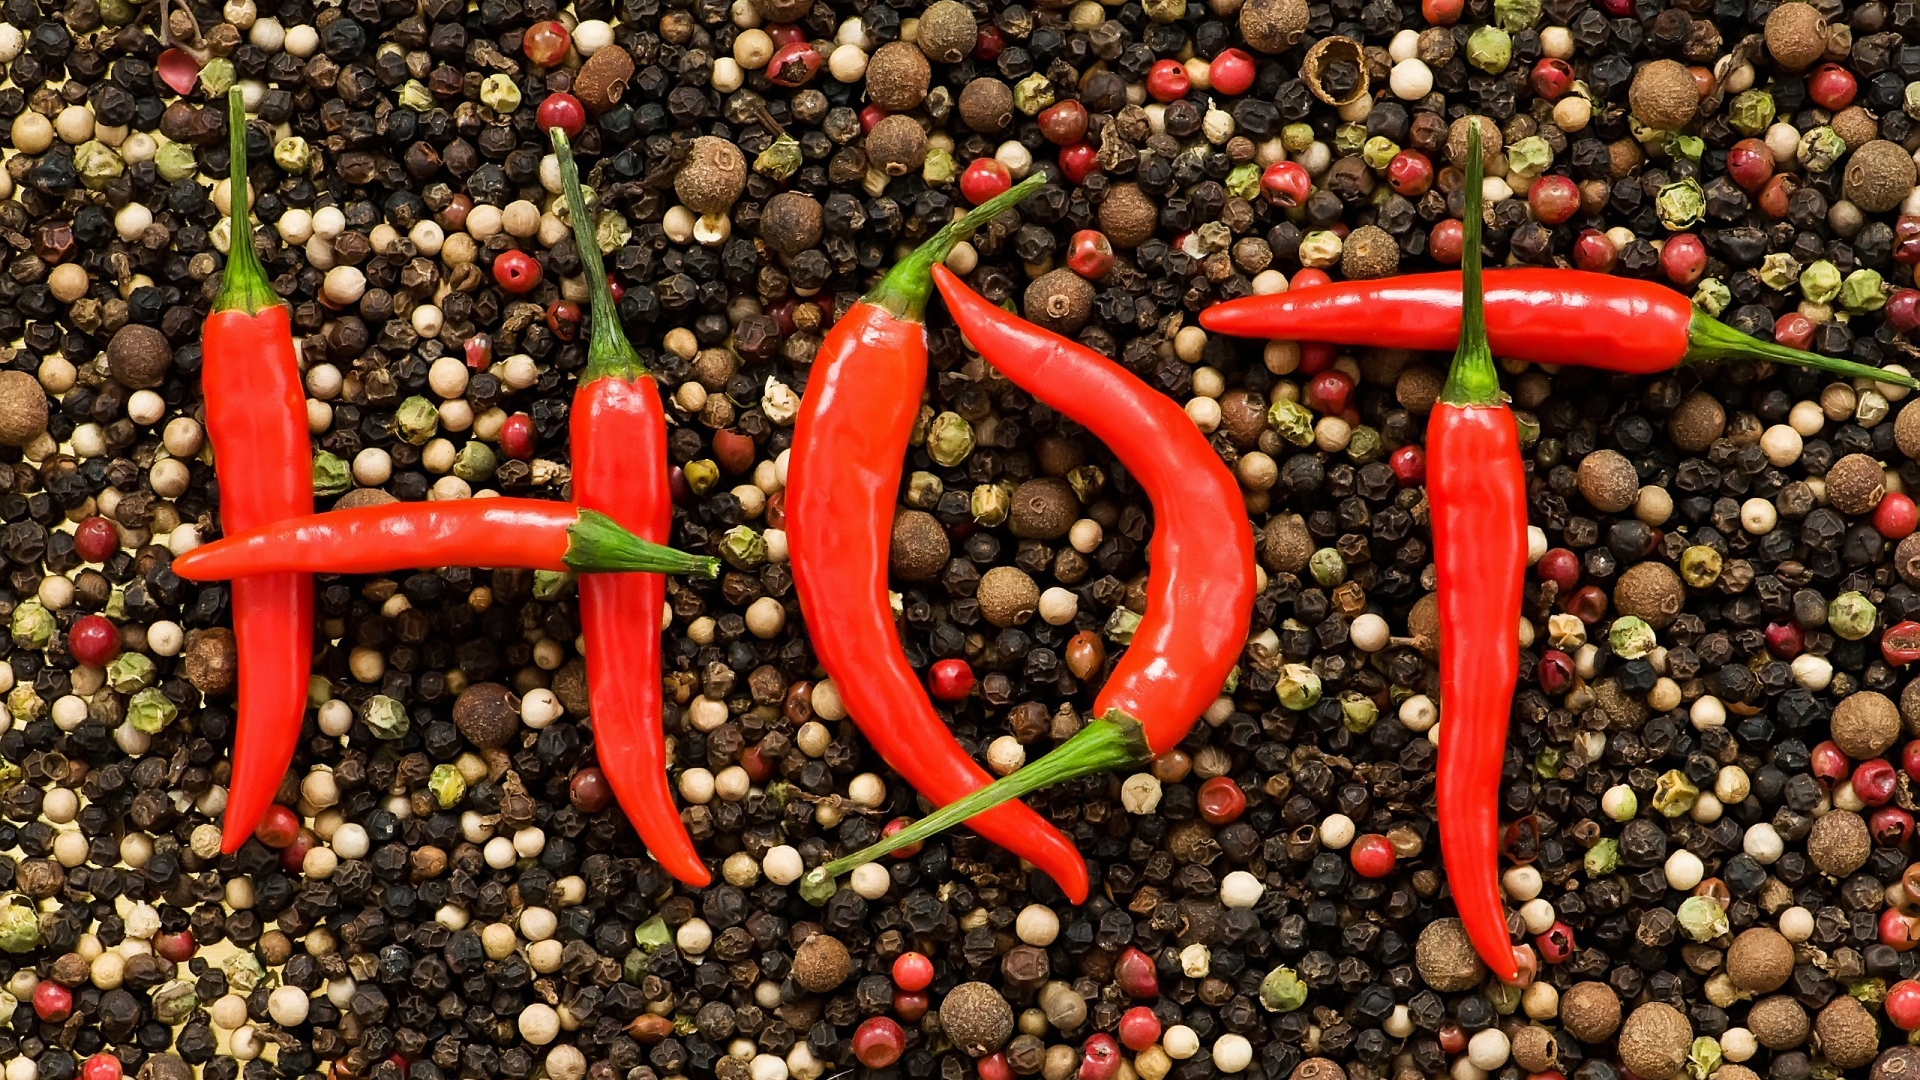 Hot Chilli and Pepper for 1920 x 1080 HDTV 1080p resolution